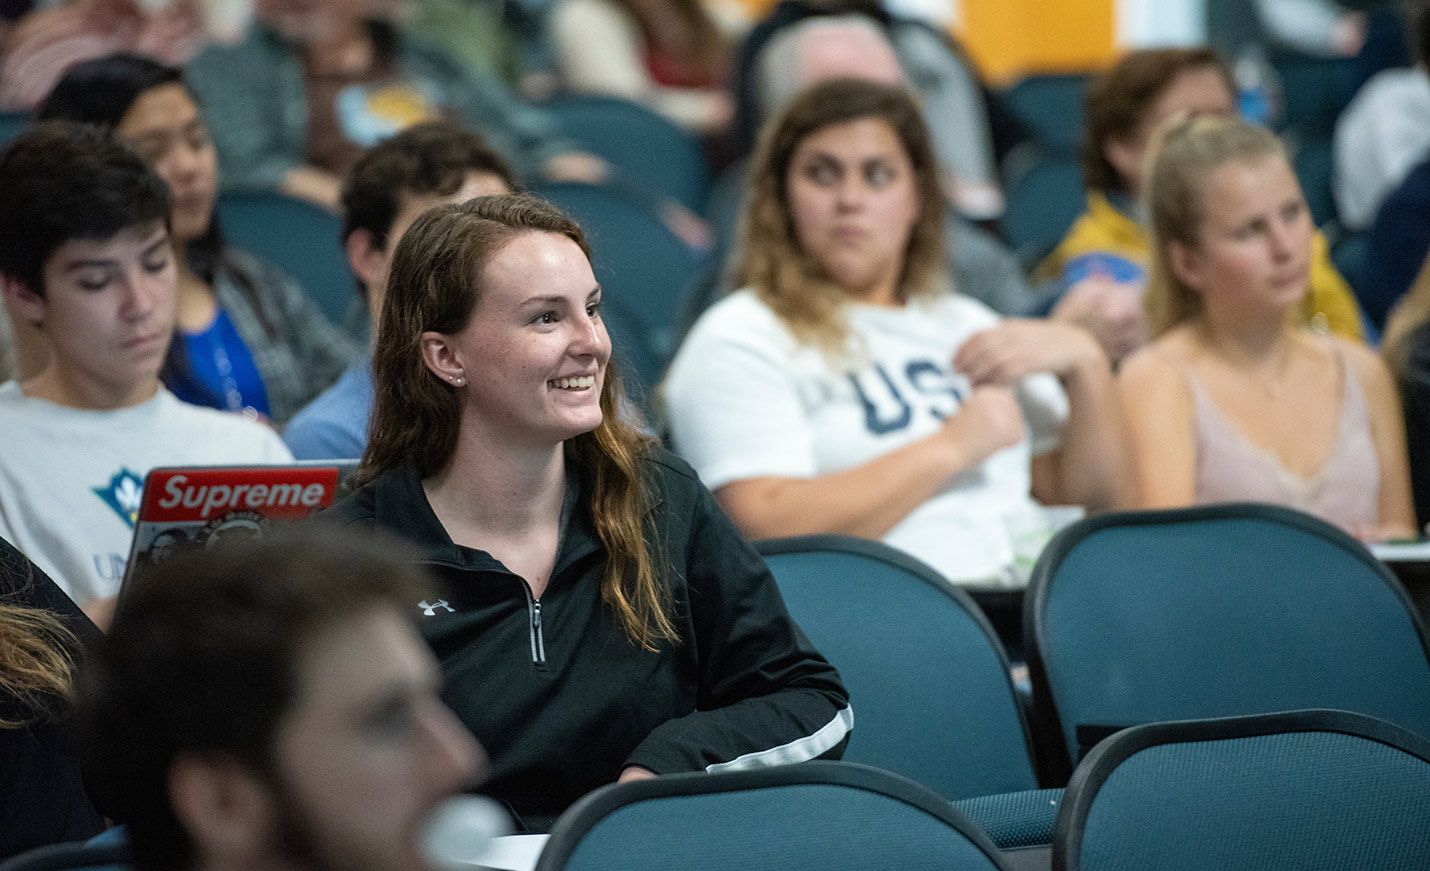 Smiling students sitting in lecture hall